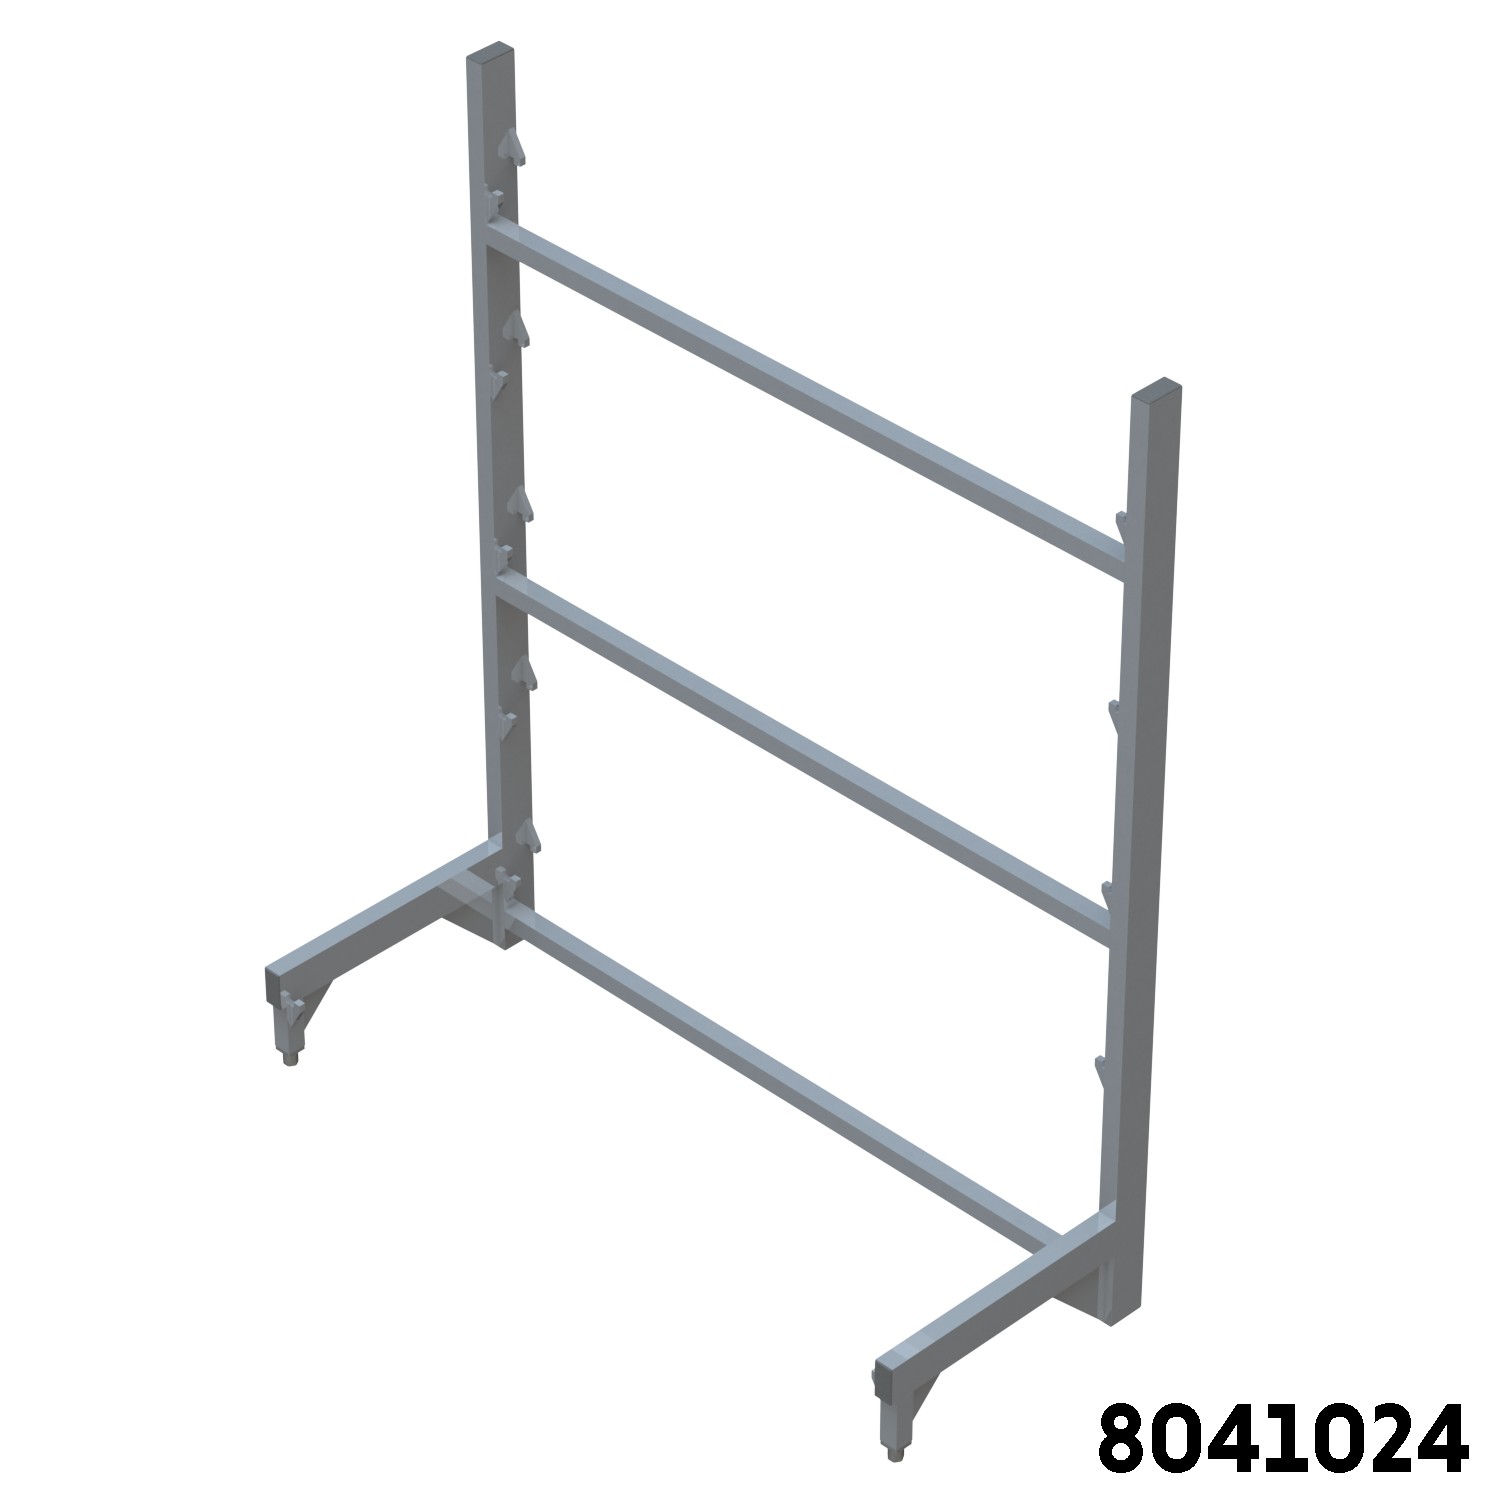 Aluminum Cantilevered Shelving picking cart NSF cart NSF rack NSF approved NSF certified National Sanitation Foundation tray shelf Distribution Cart picking cart tray shelf picking cart, picking cart, ecom cart, ecommerce cart, ecommerce picking cart, picking cart, INDUSTRIAL CARTS, grocery cart grocery picking cart, department store cart, beverage cart NSF approved. This food service cart meets strict standards and procedures imposed by NSF. lug cart meat department, produce department